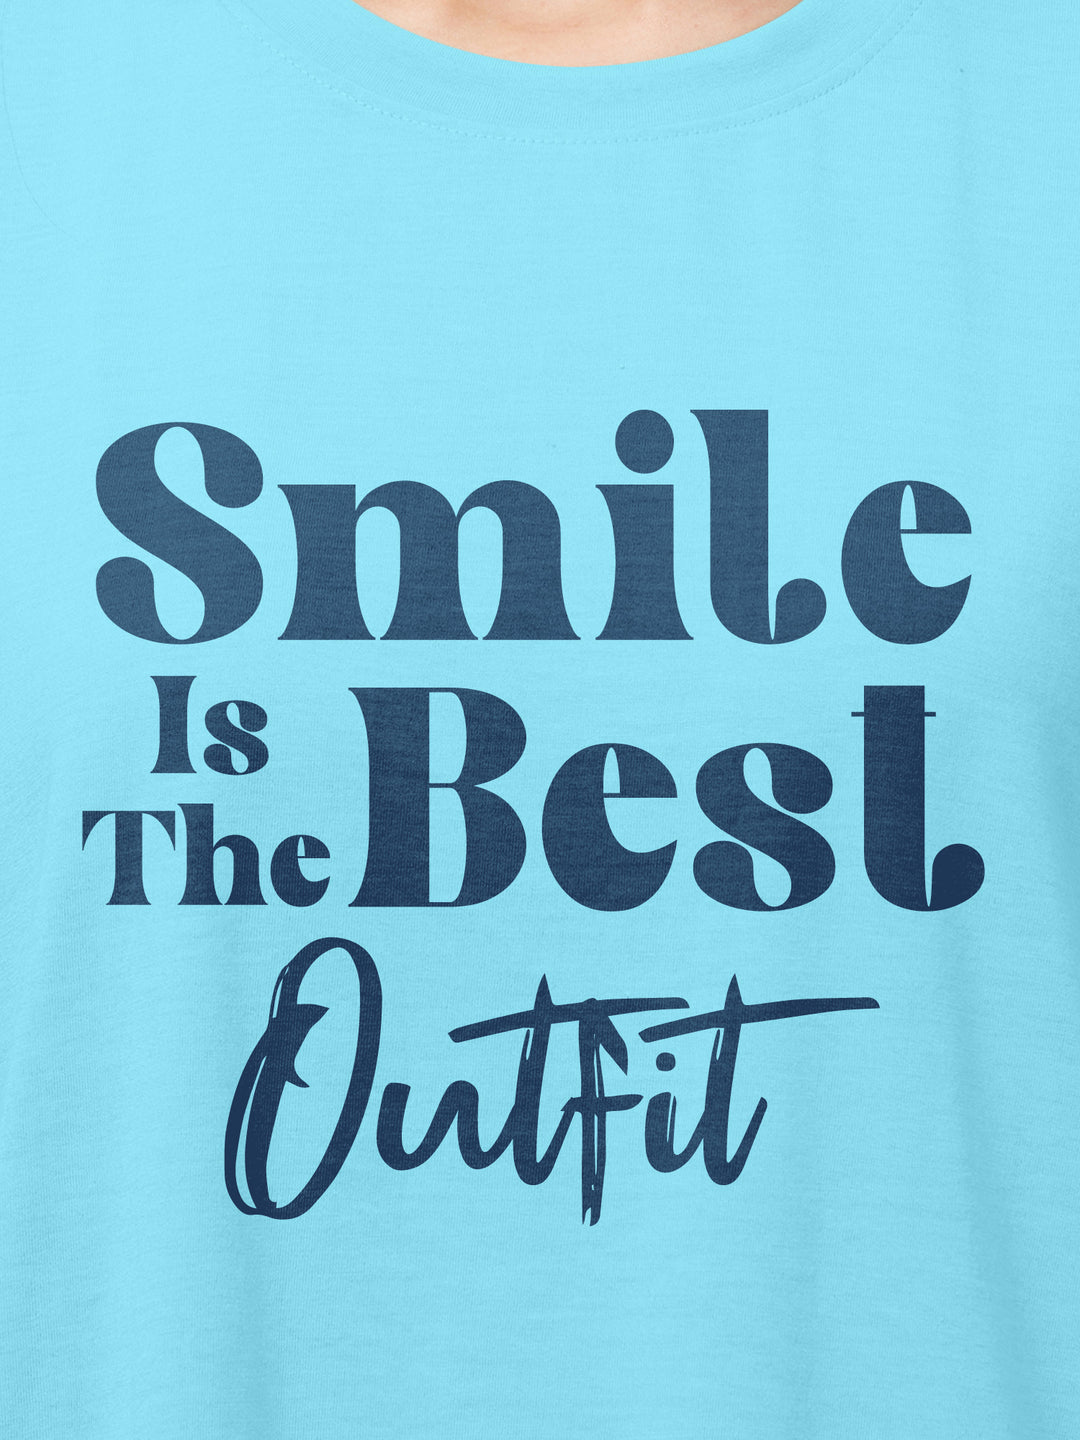 Smile Is The Best Cotton Mens T Shirt and Short Set